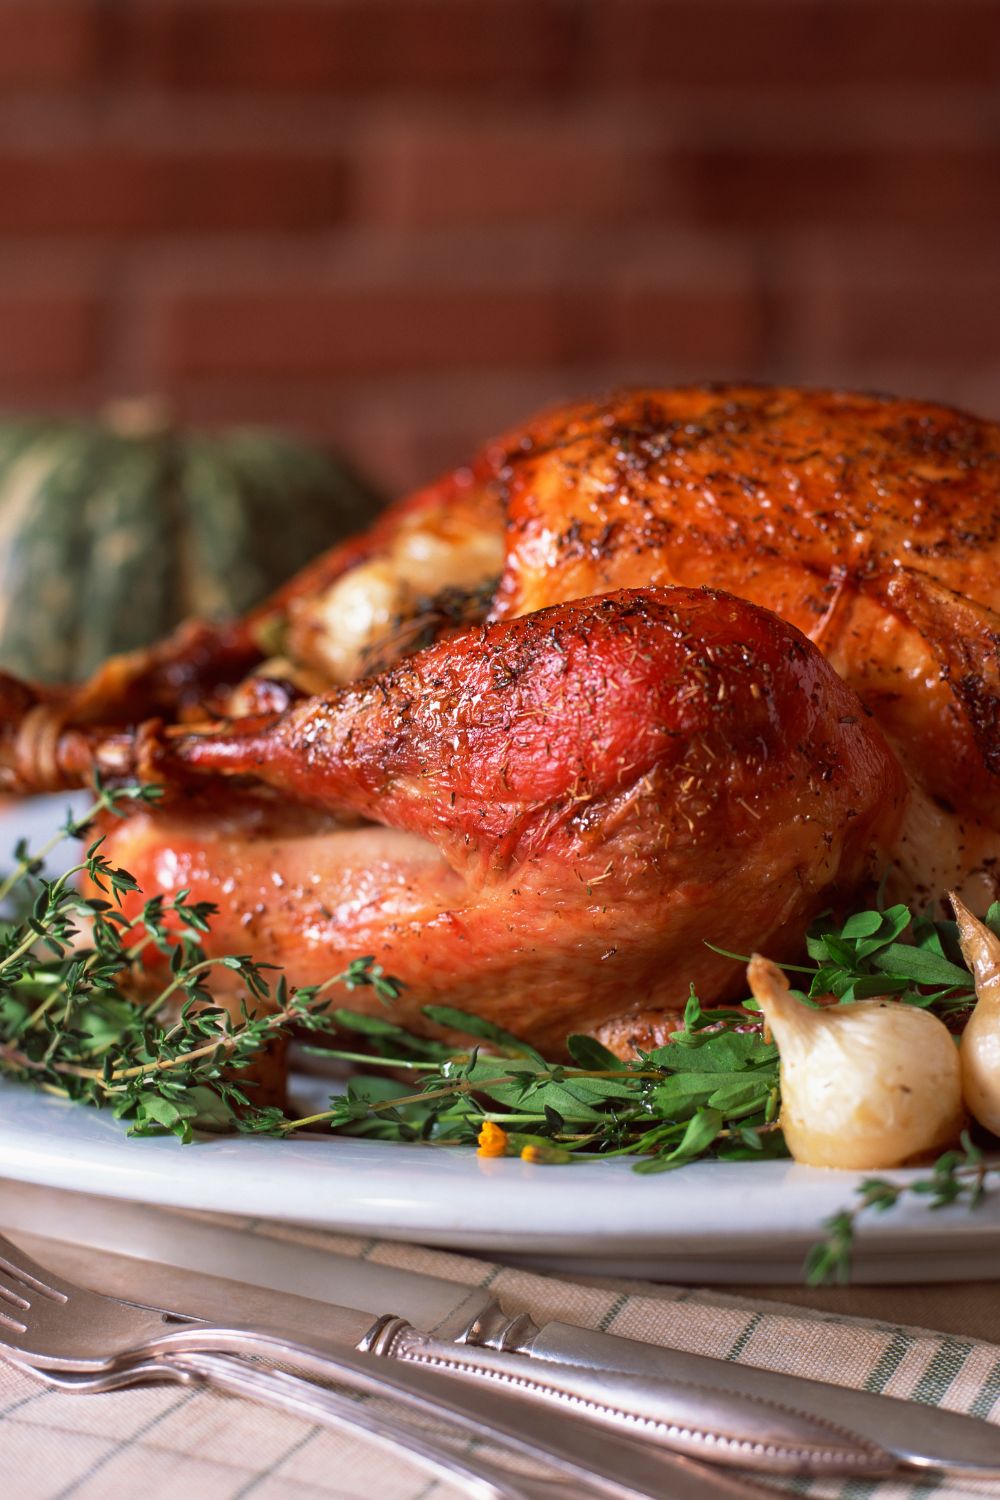 Should You Bake or Broil a Turkey